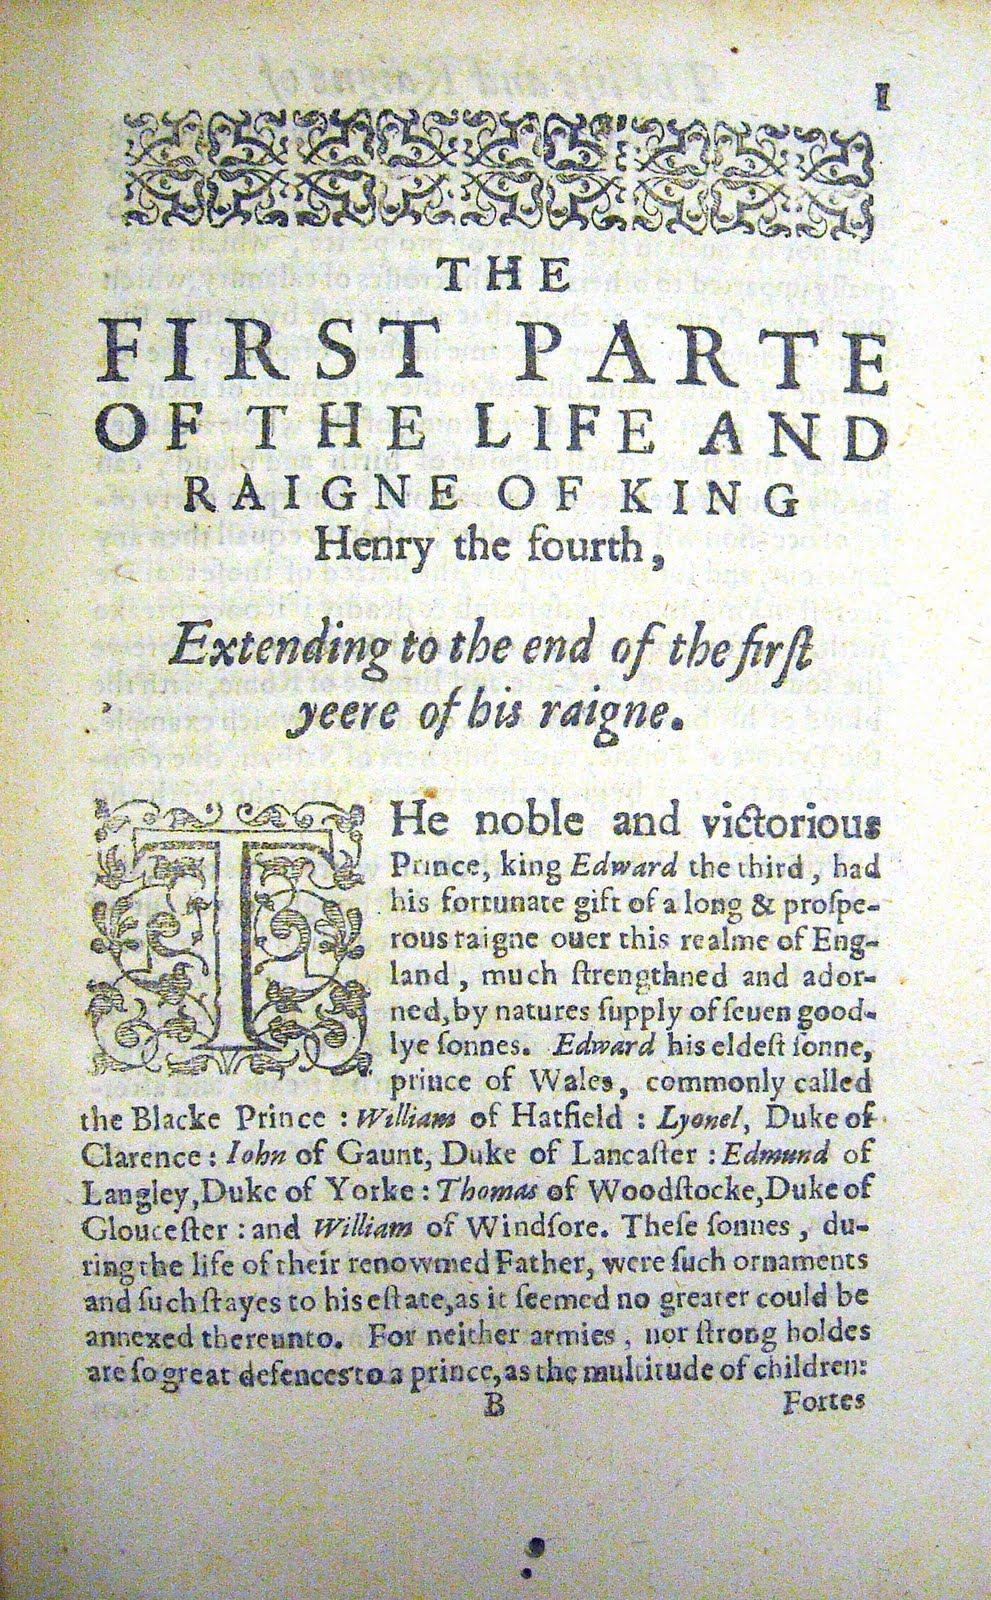 First page of The First Part of the Life and raigne of King Henrie the IIII